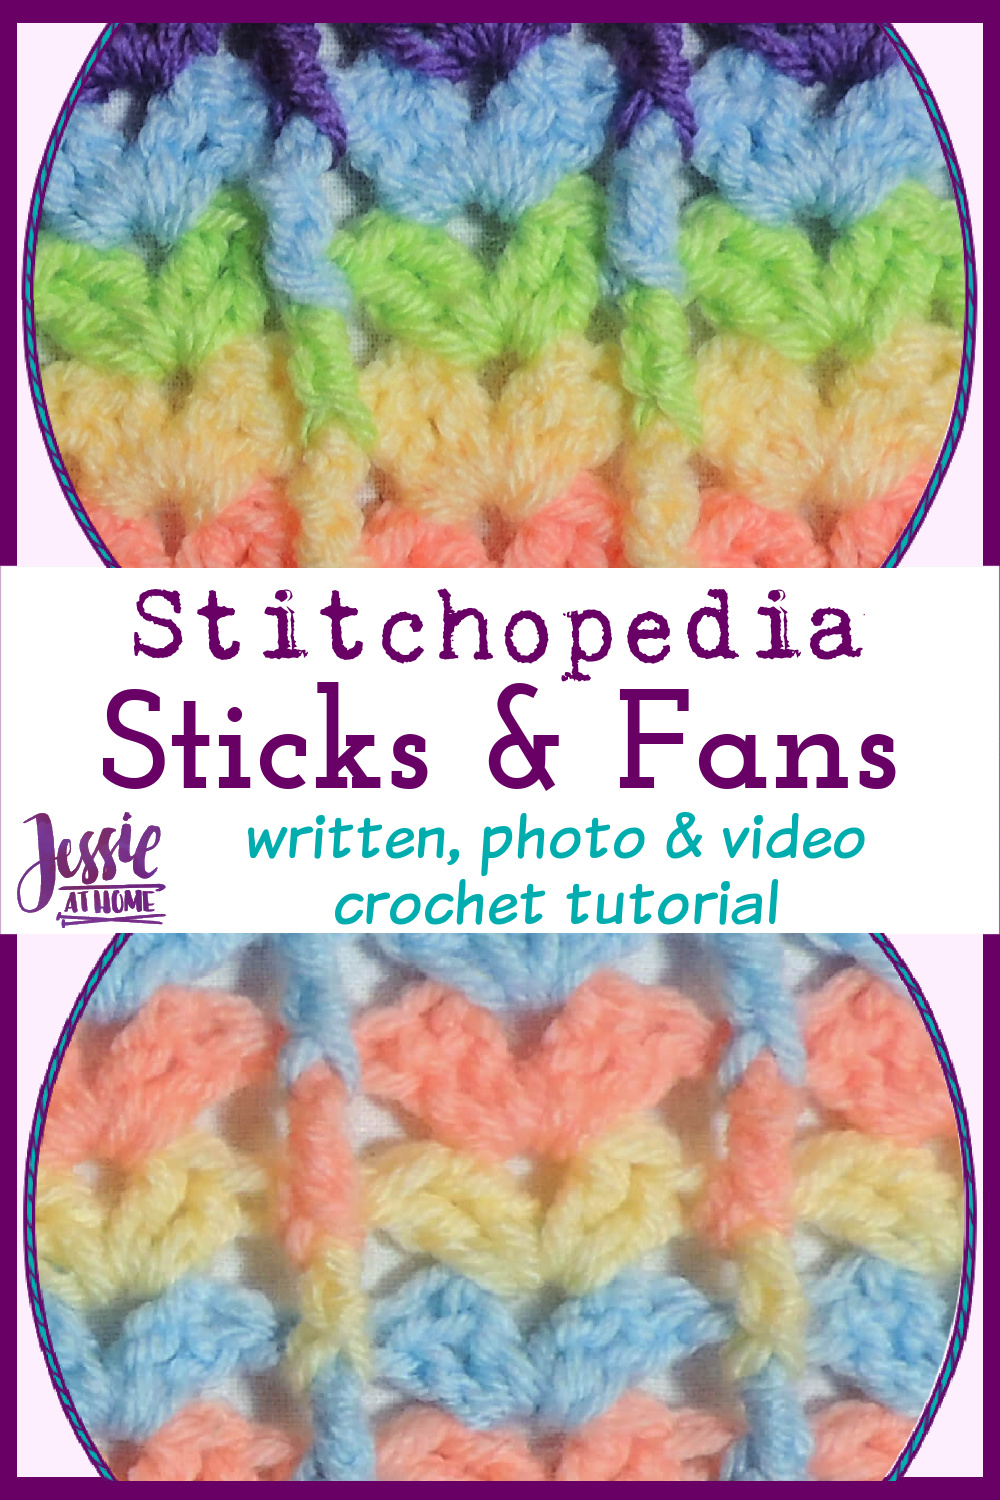 Sticks and Fans Stitch - written, photo, and video crochet tutorial